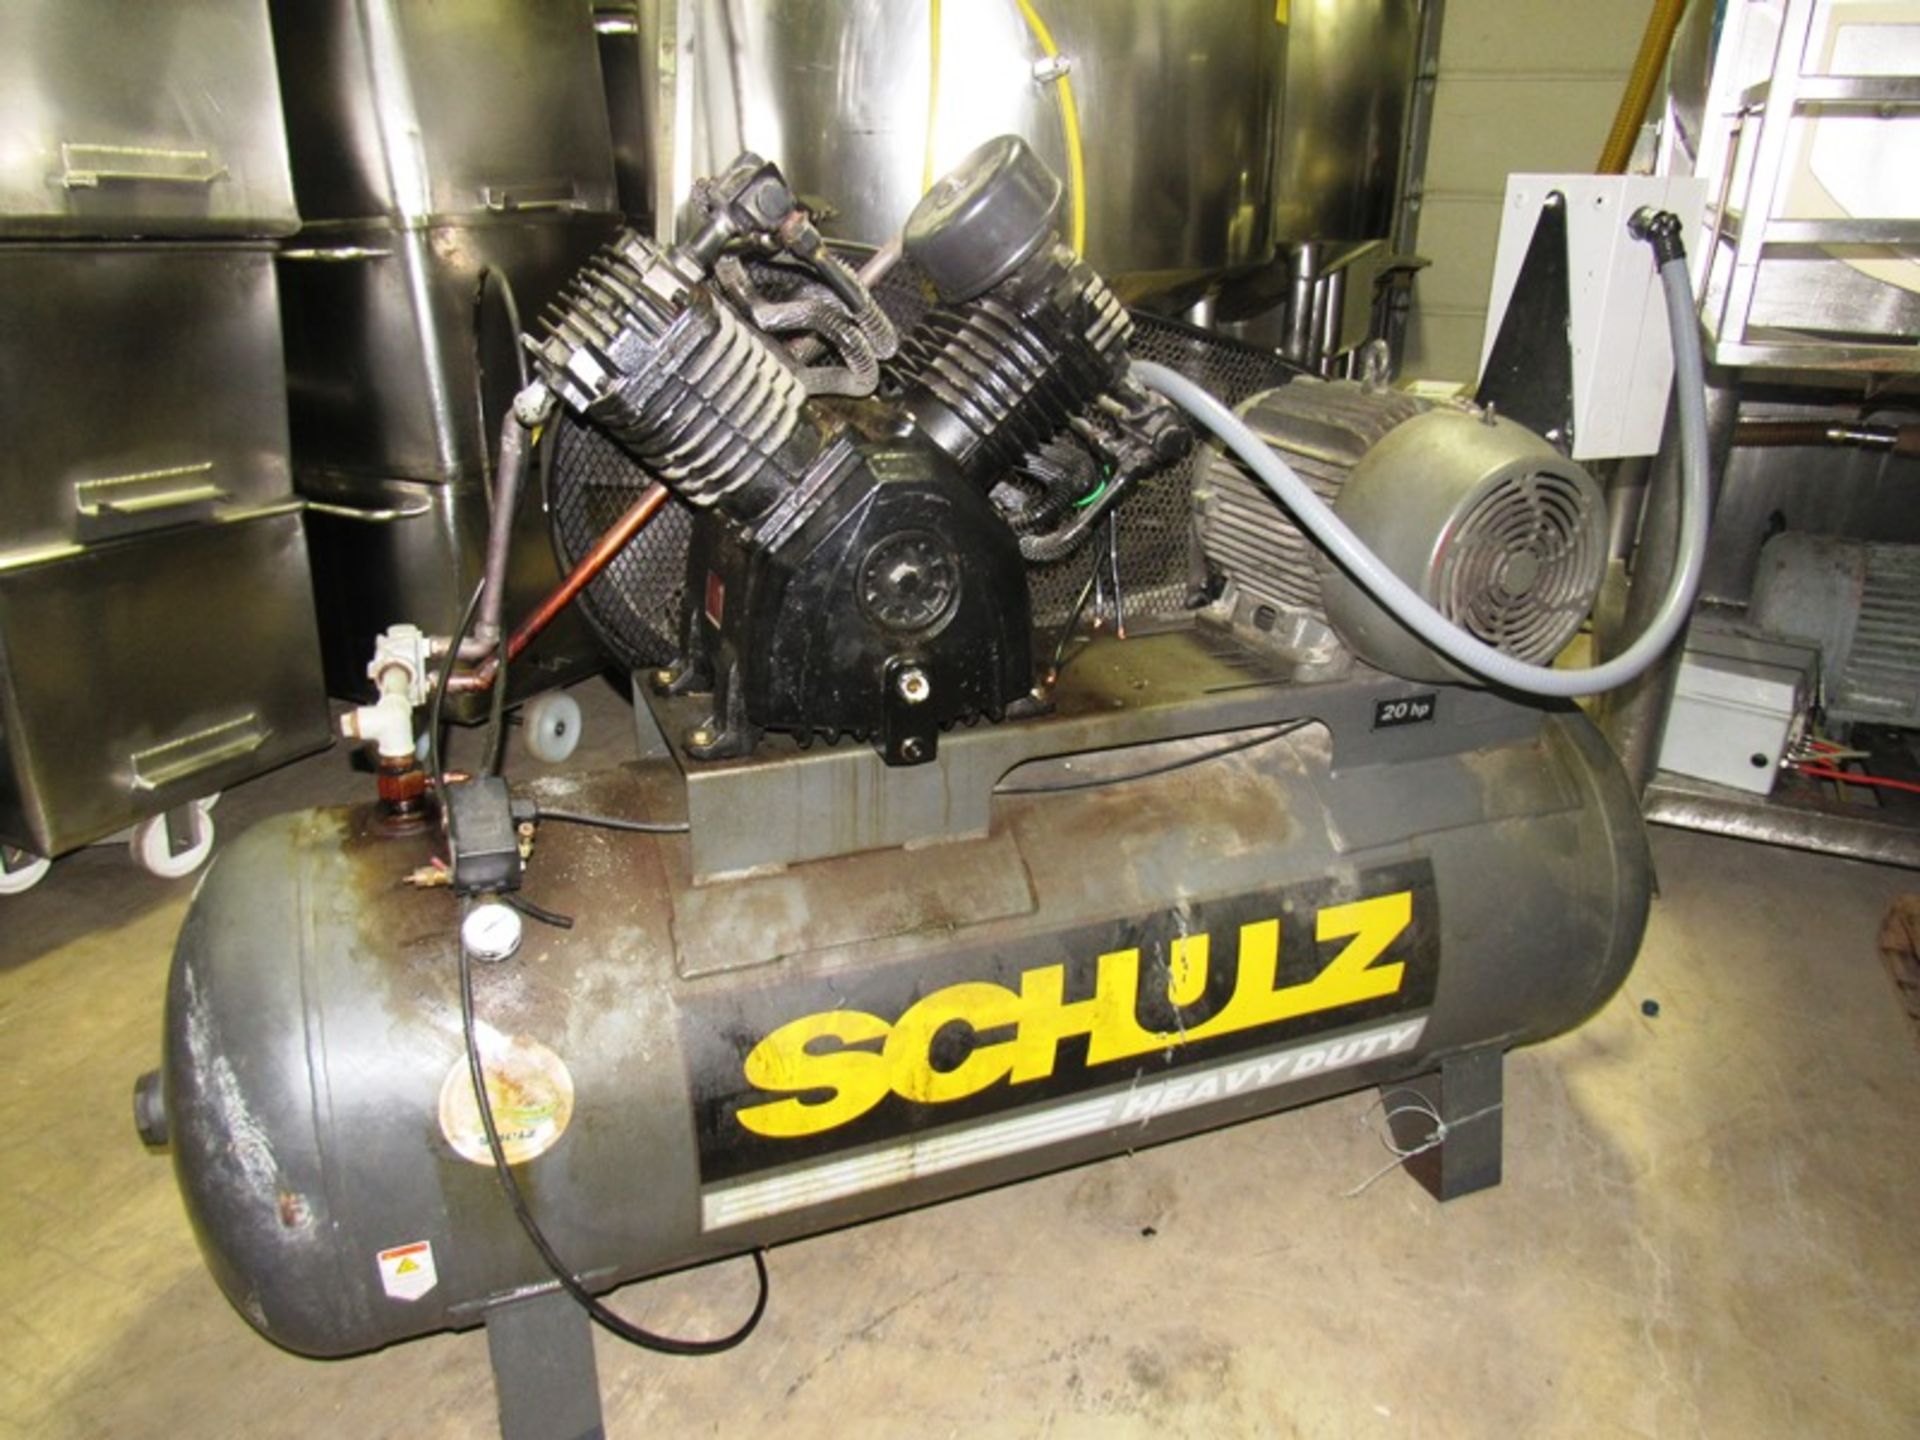 Schulz Mdl. 80BR 2 Stage Air Compressor, 15 h.p., 208/230/460 volts, 3 phase, on holding tank